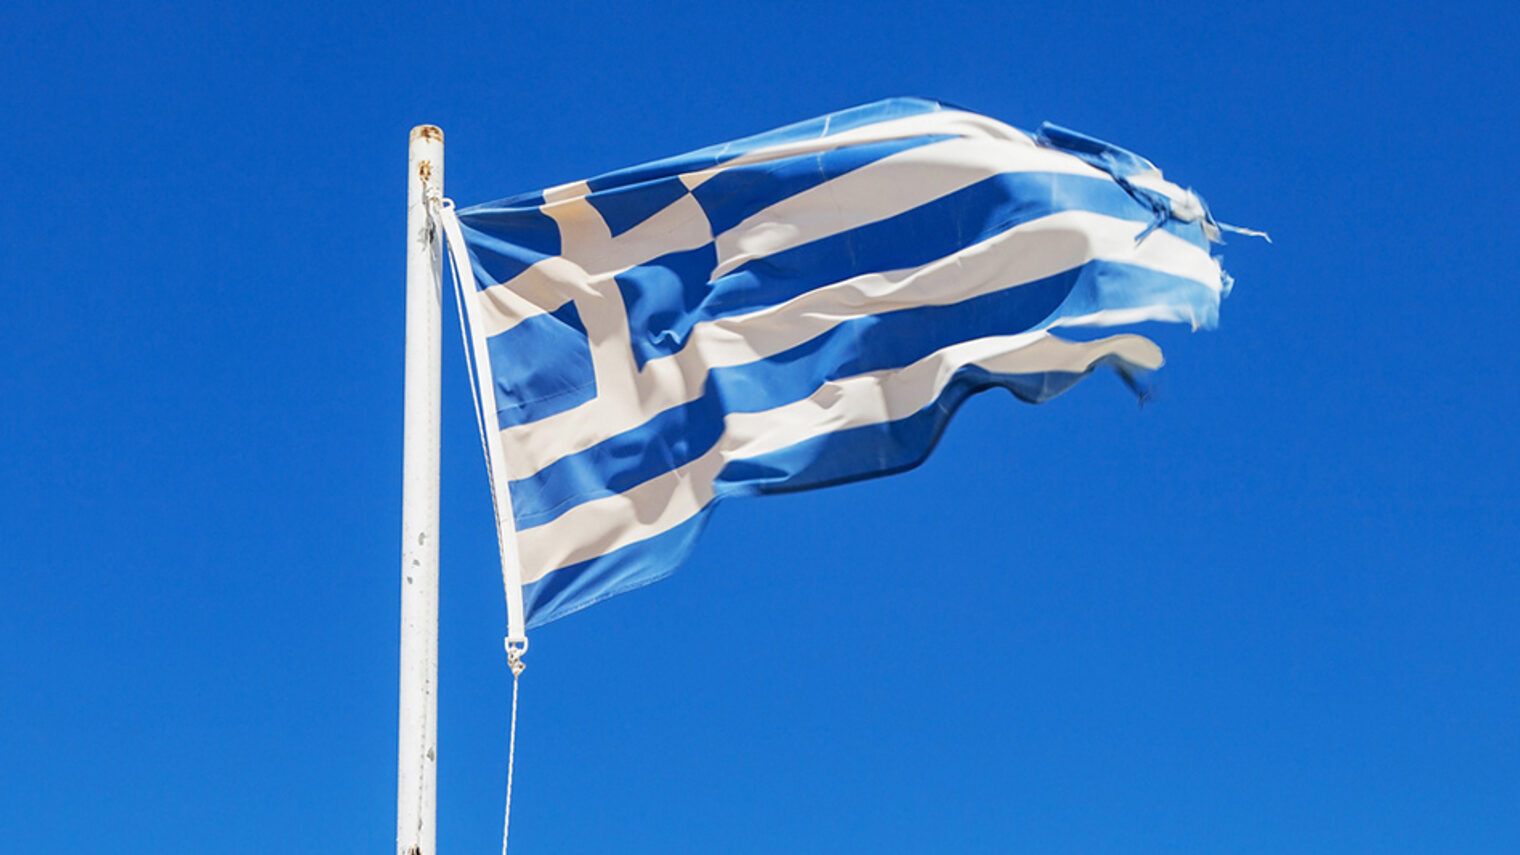 Greece and European Union flags on the sky. Schlagwort(e): sun, aegean, vacation, outdoors, water, beautiful, island, holiday, greece, flag, sky, blue, greek, europe, white, wind, national, tourism, travel, day, culture, banner, symbol, sea, european, mediterranean, athens, country, landscape, background, waving, cross, crisis, state, hellas, stripes, architecture, summer, sun, aegean, vacation, outdoors, water, beautiful, island, holiday, greece, flag, sky, blue, greek, europe, white, wind, national, tourism, travel, day, culture, banner, symbol, sea, european, mediterranean, athens, country, landscape, background, waving, cross, crisis, state, hellas, stripes, architecture, summer